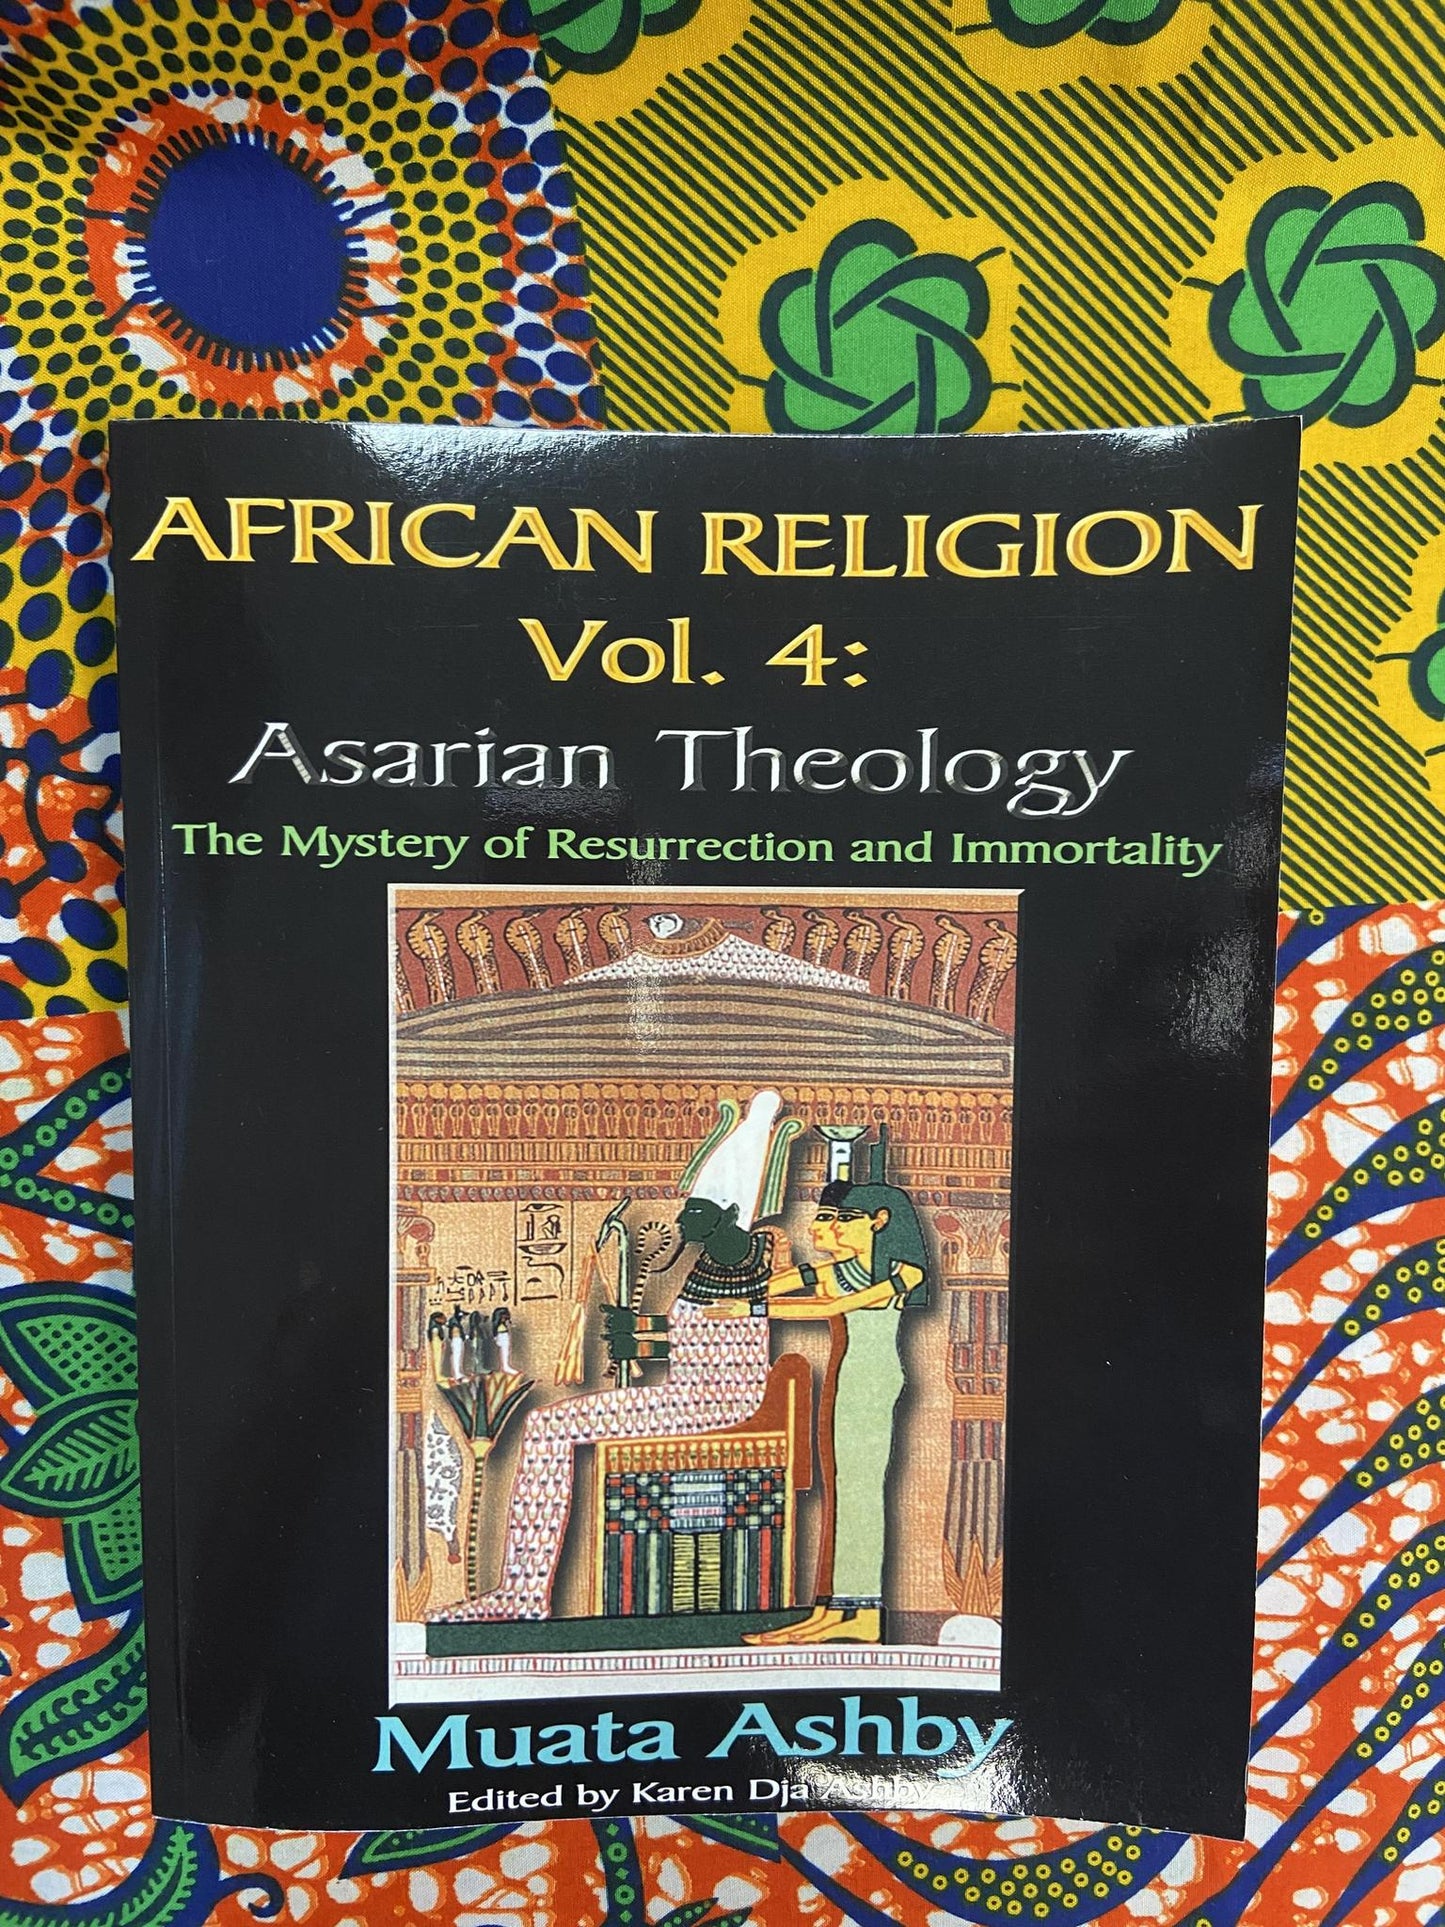 "African Religion Vol. 4: Asarian Theology" by Muata Ashby